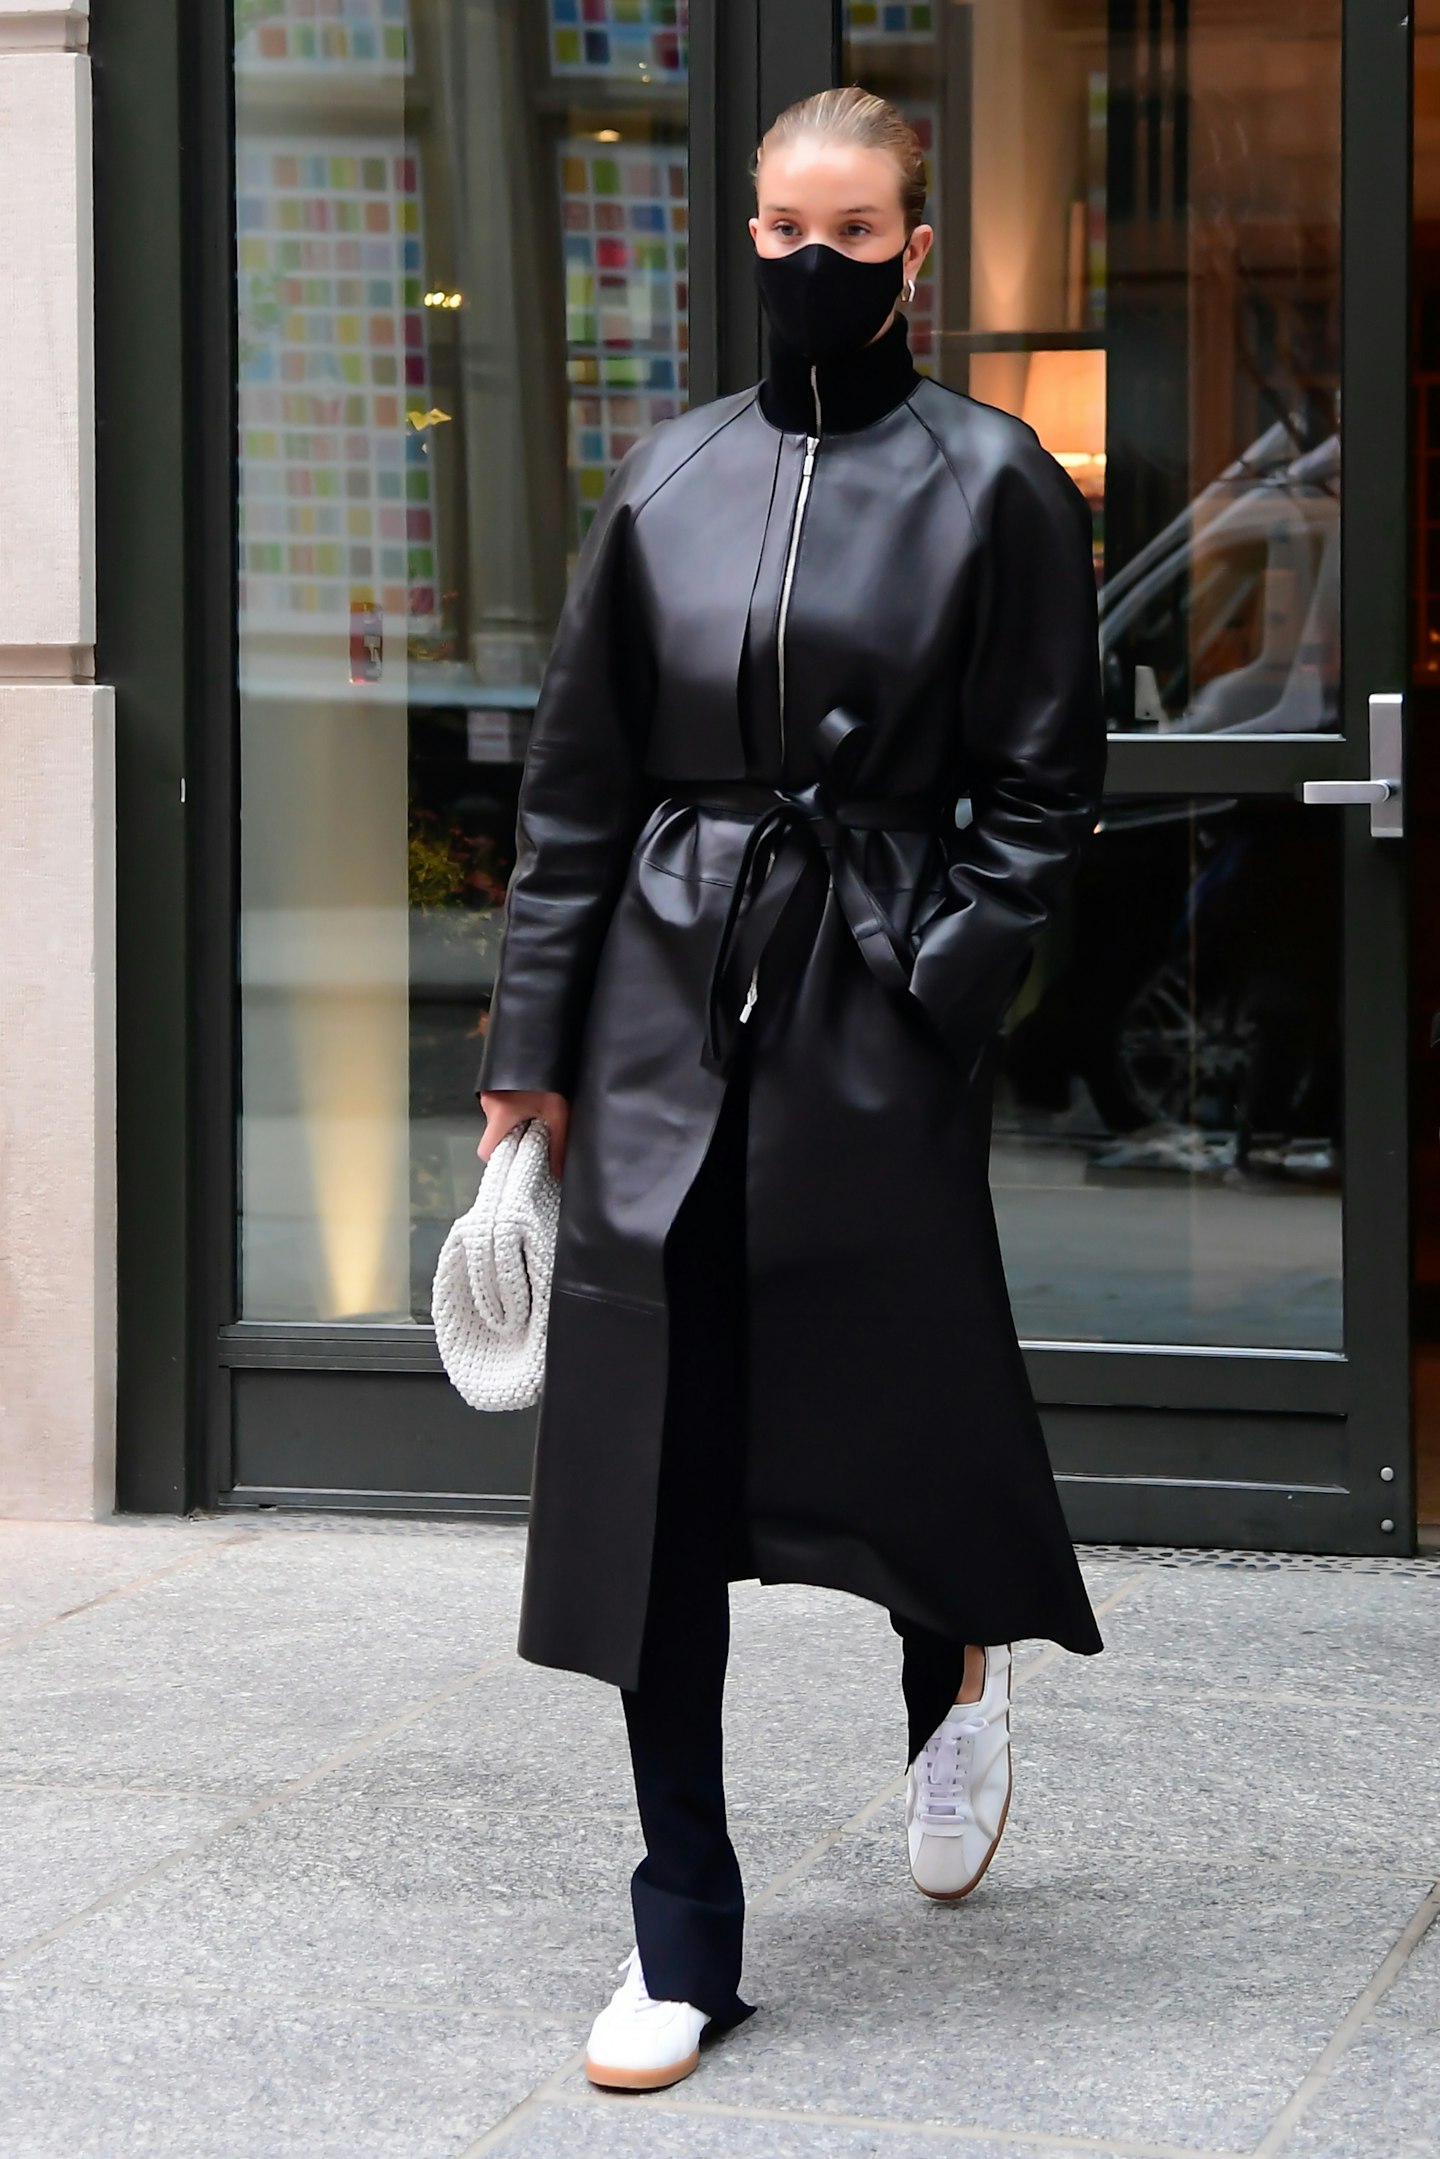 Rosie Huntington-Whiteley wearing an all-black outfit in New York